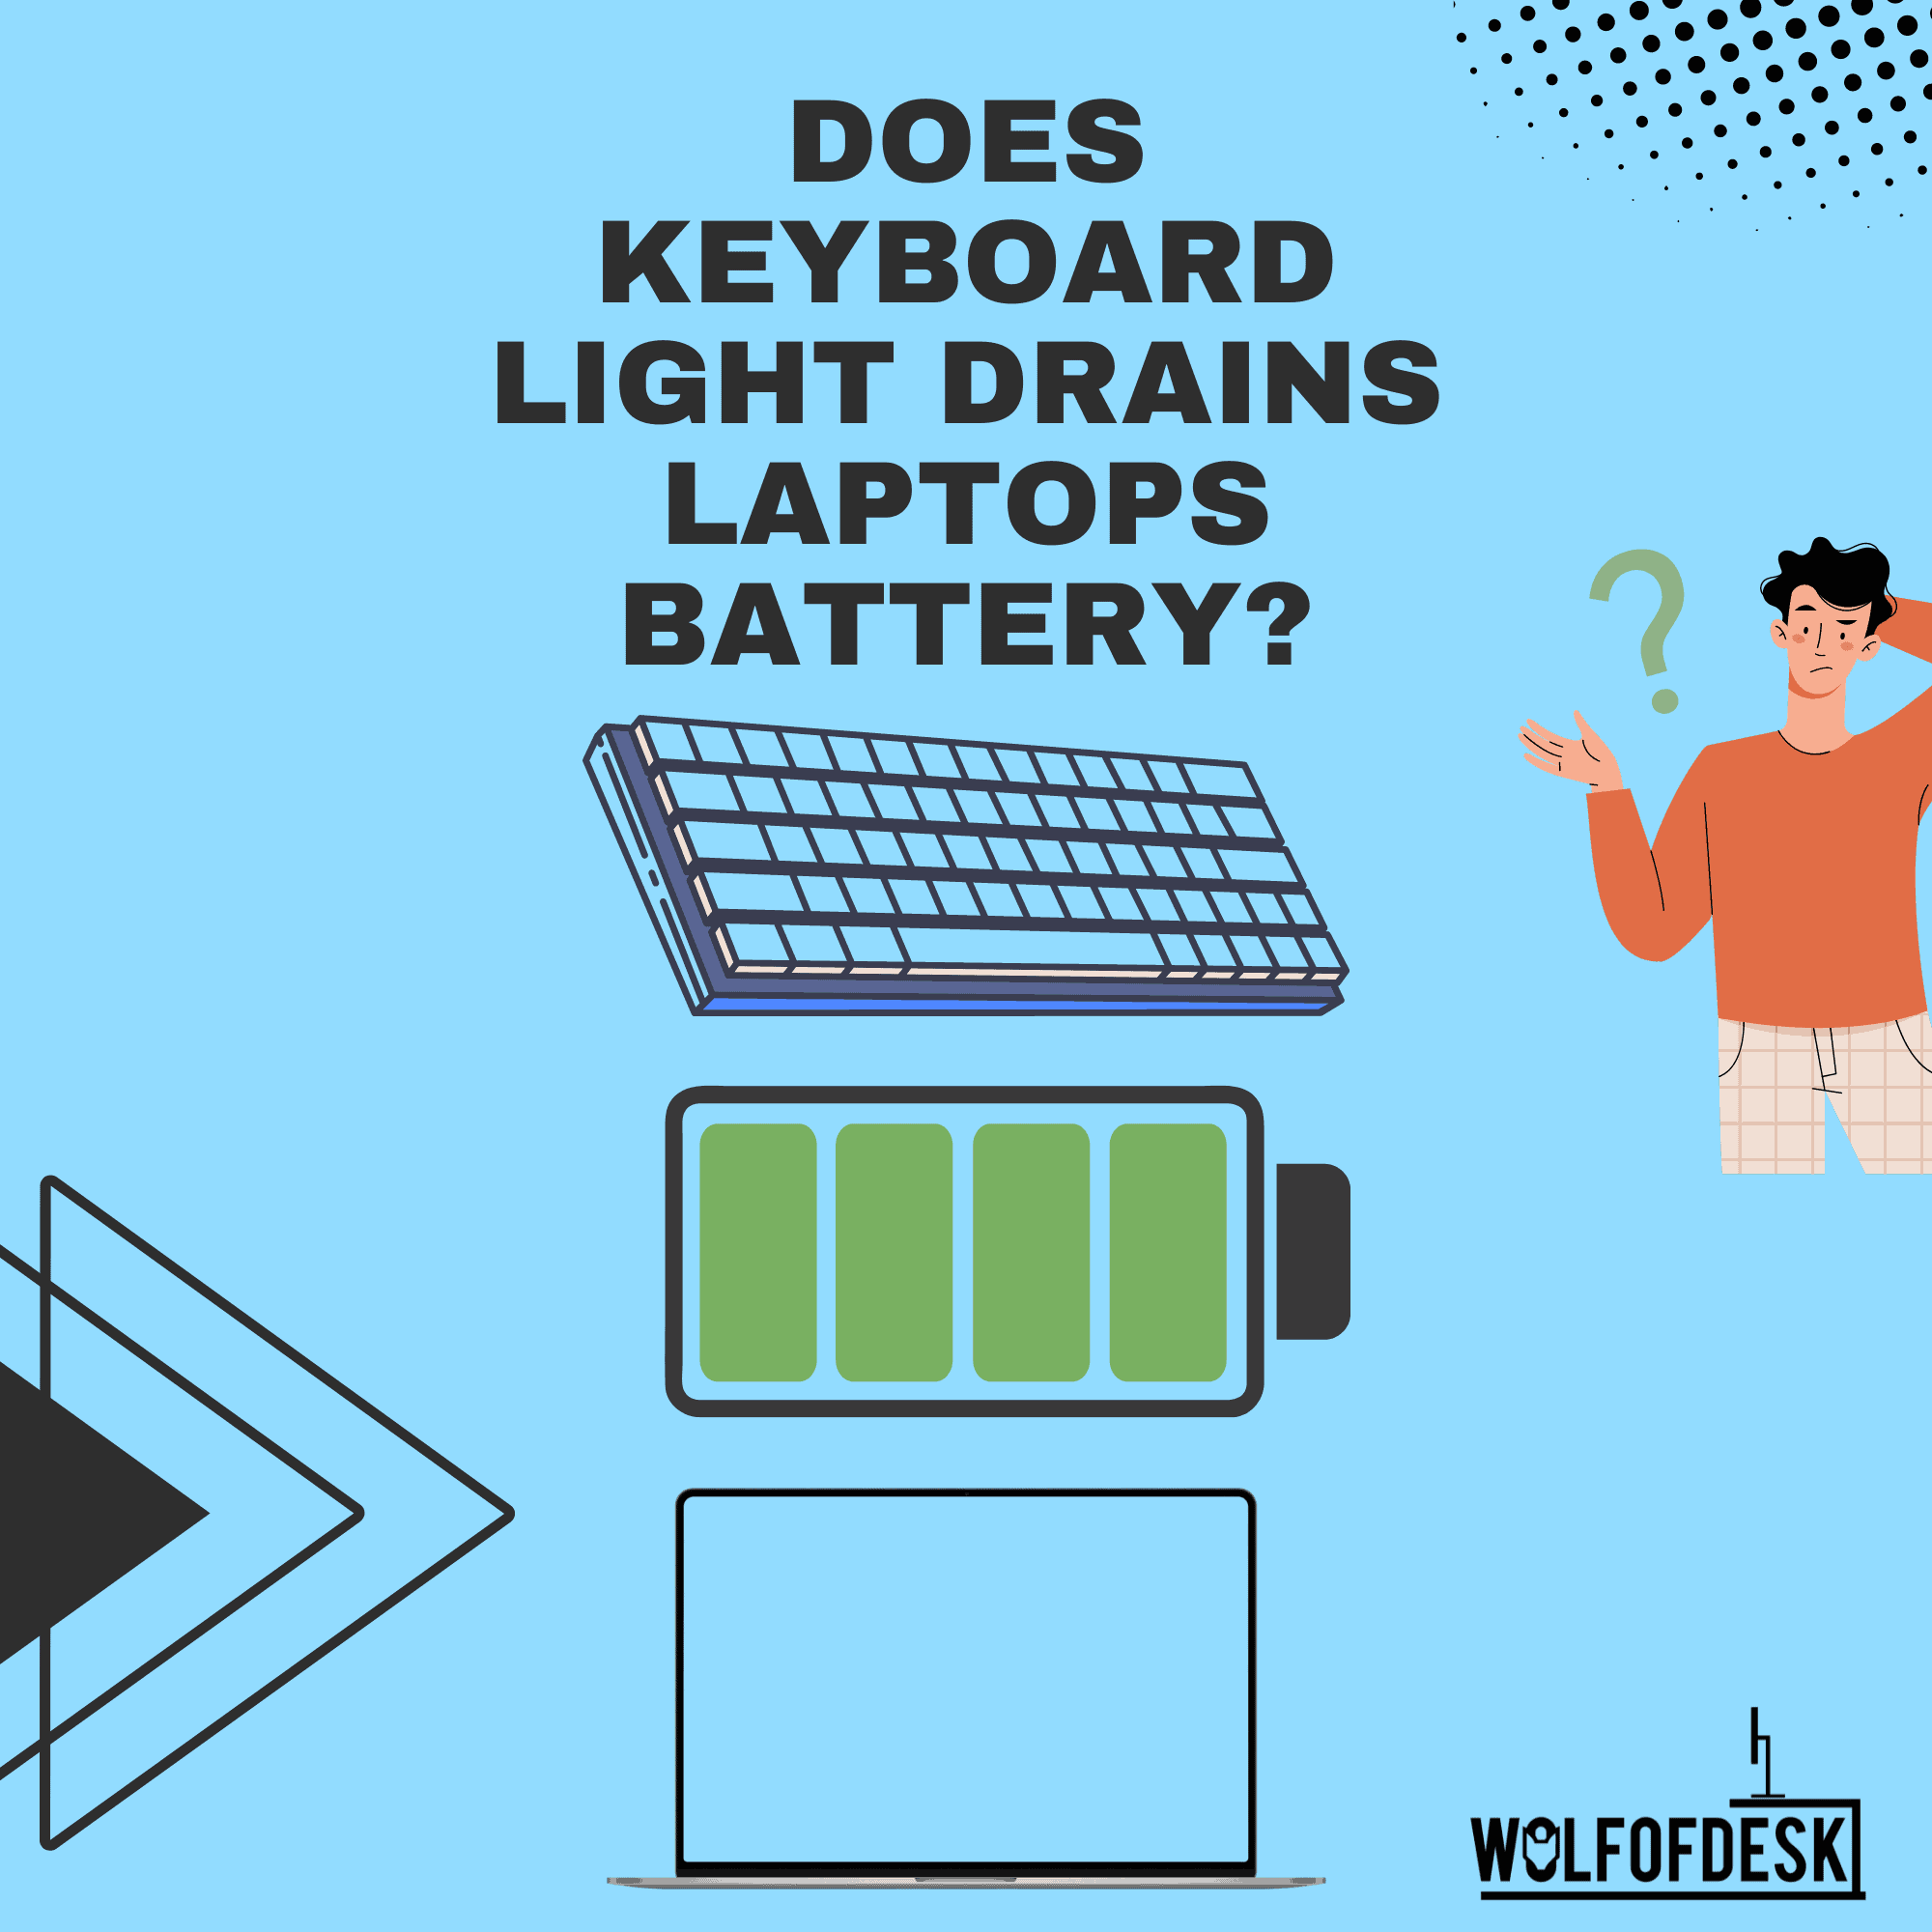 can keyboard lights drain laptops battery life faster? answered